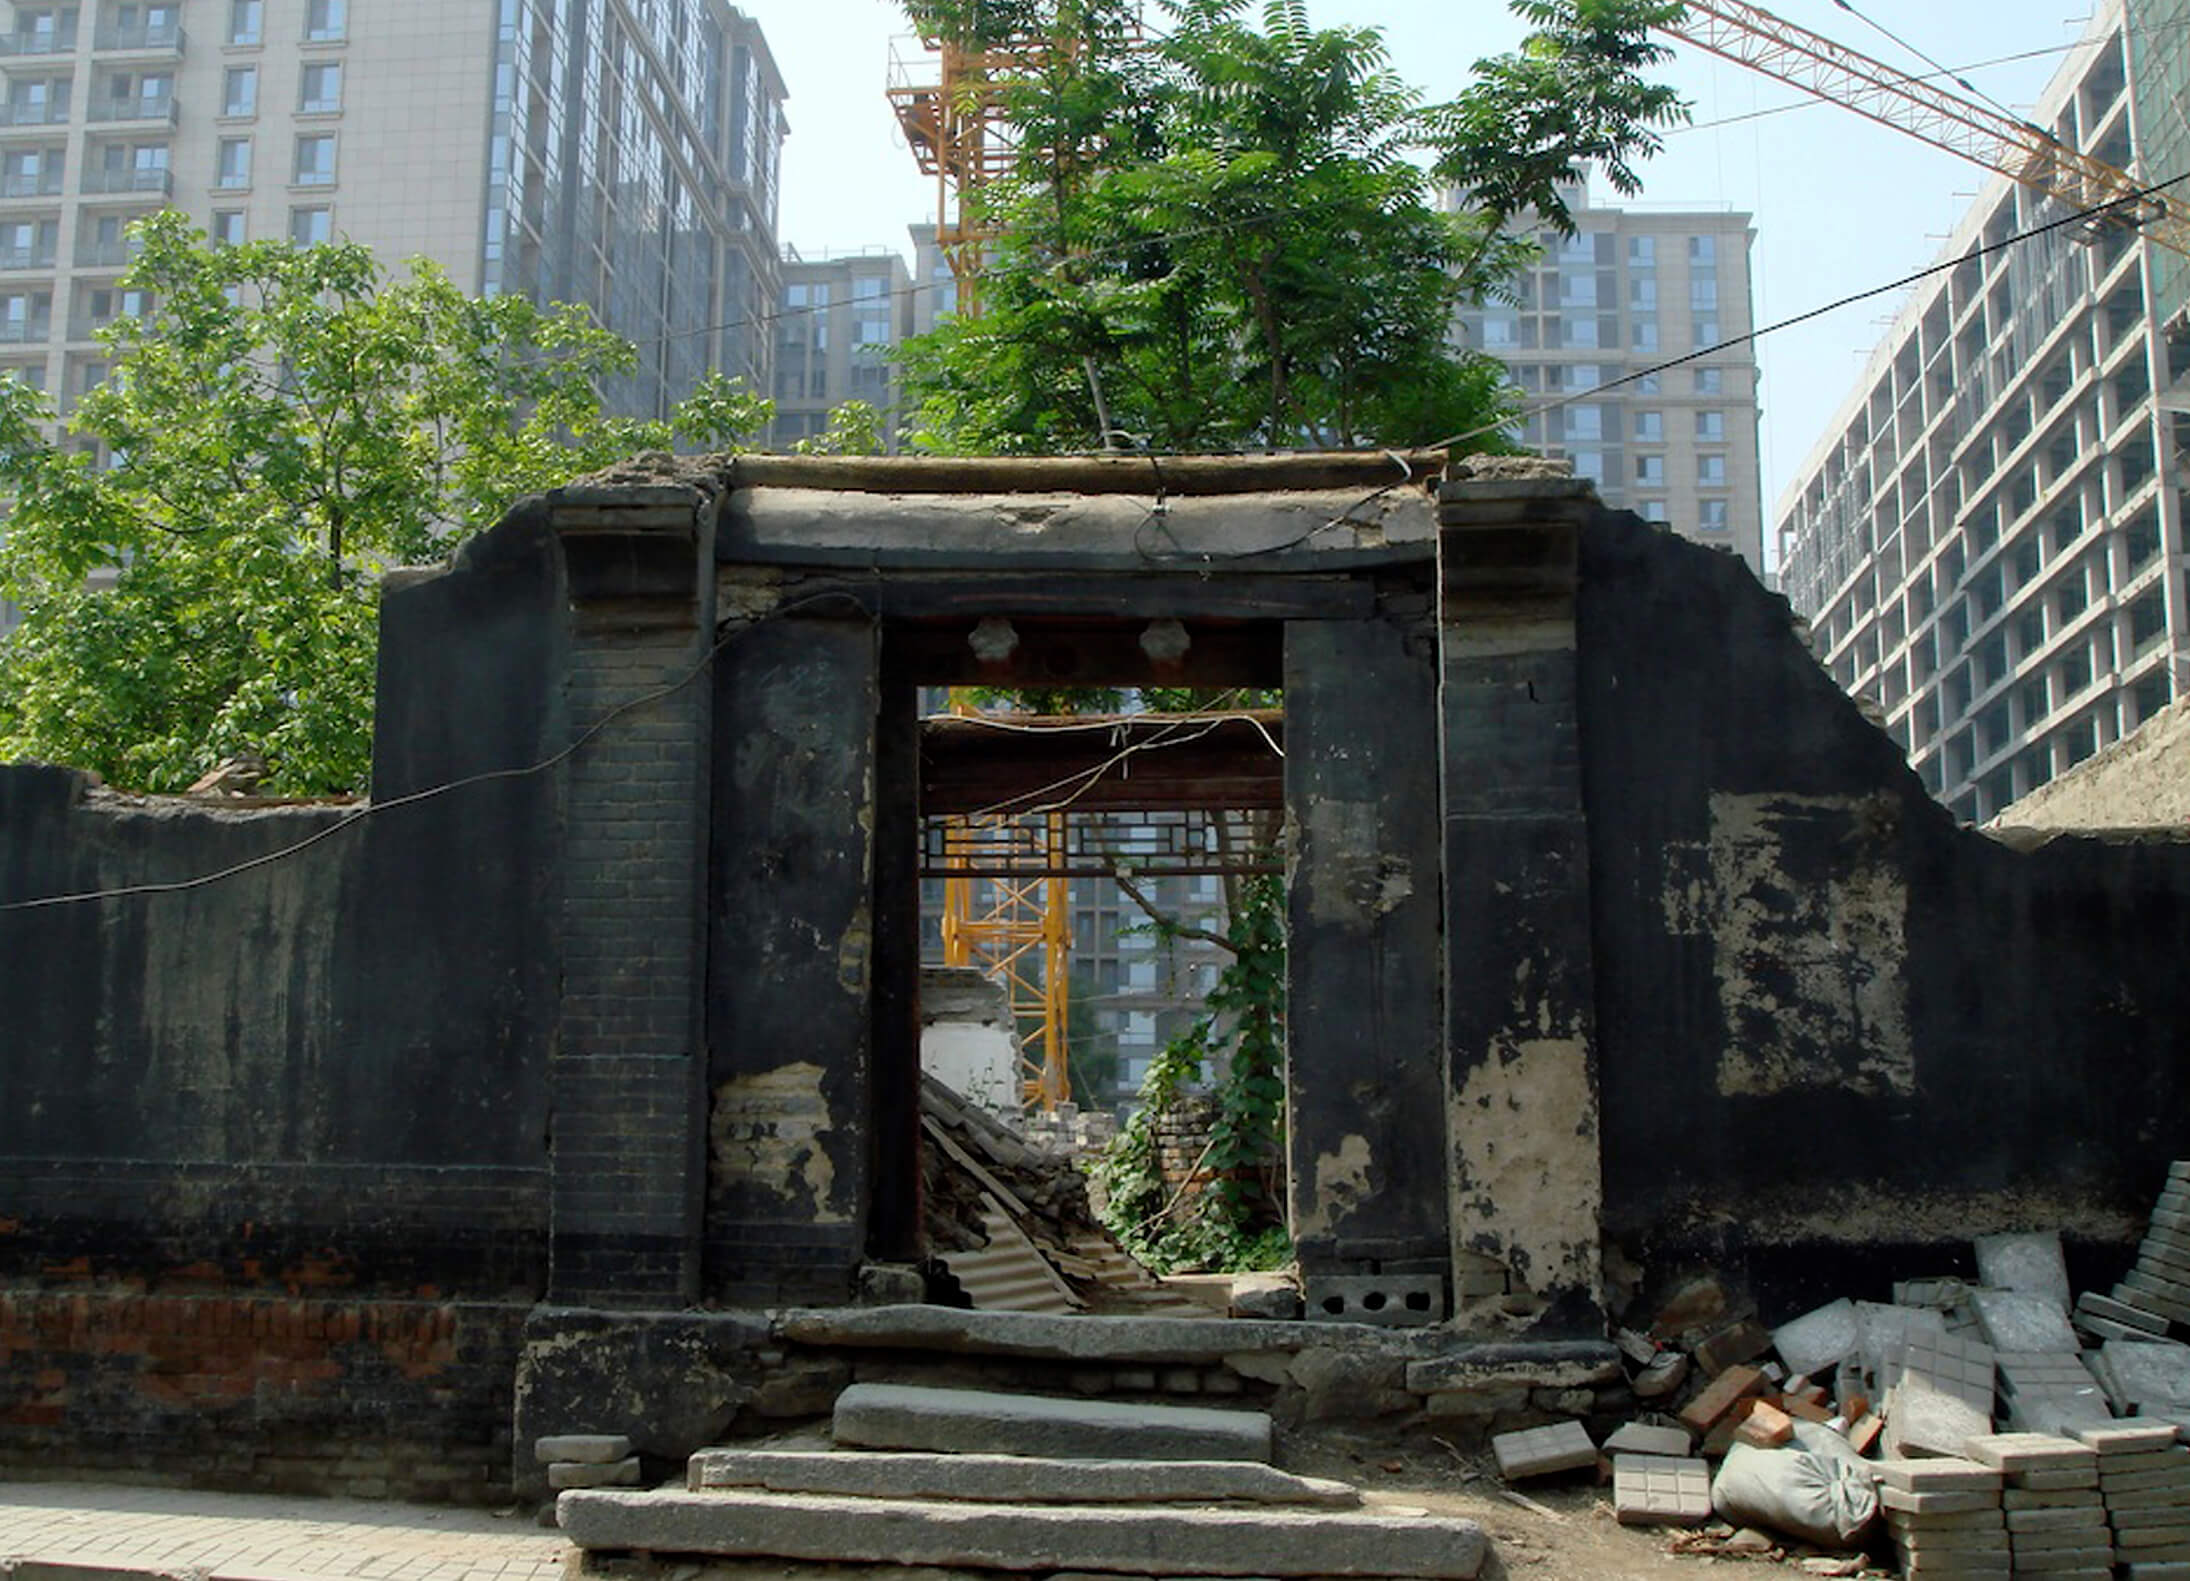 Still from Missing Home: The Last Days of the Beijing Hutongs Weimin Zhang. A damaged building structure and door frame stand among other buildings, trees, and a crane.